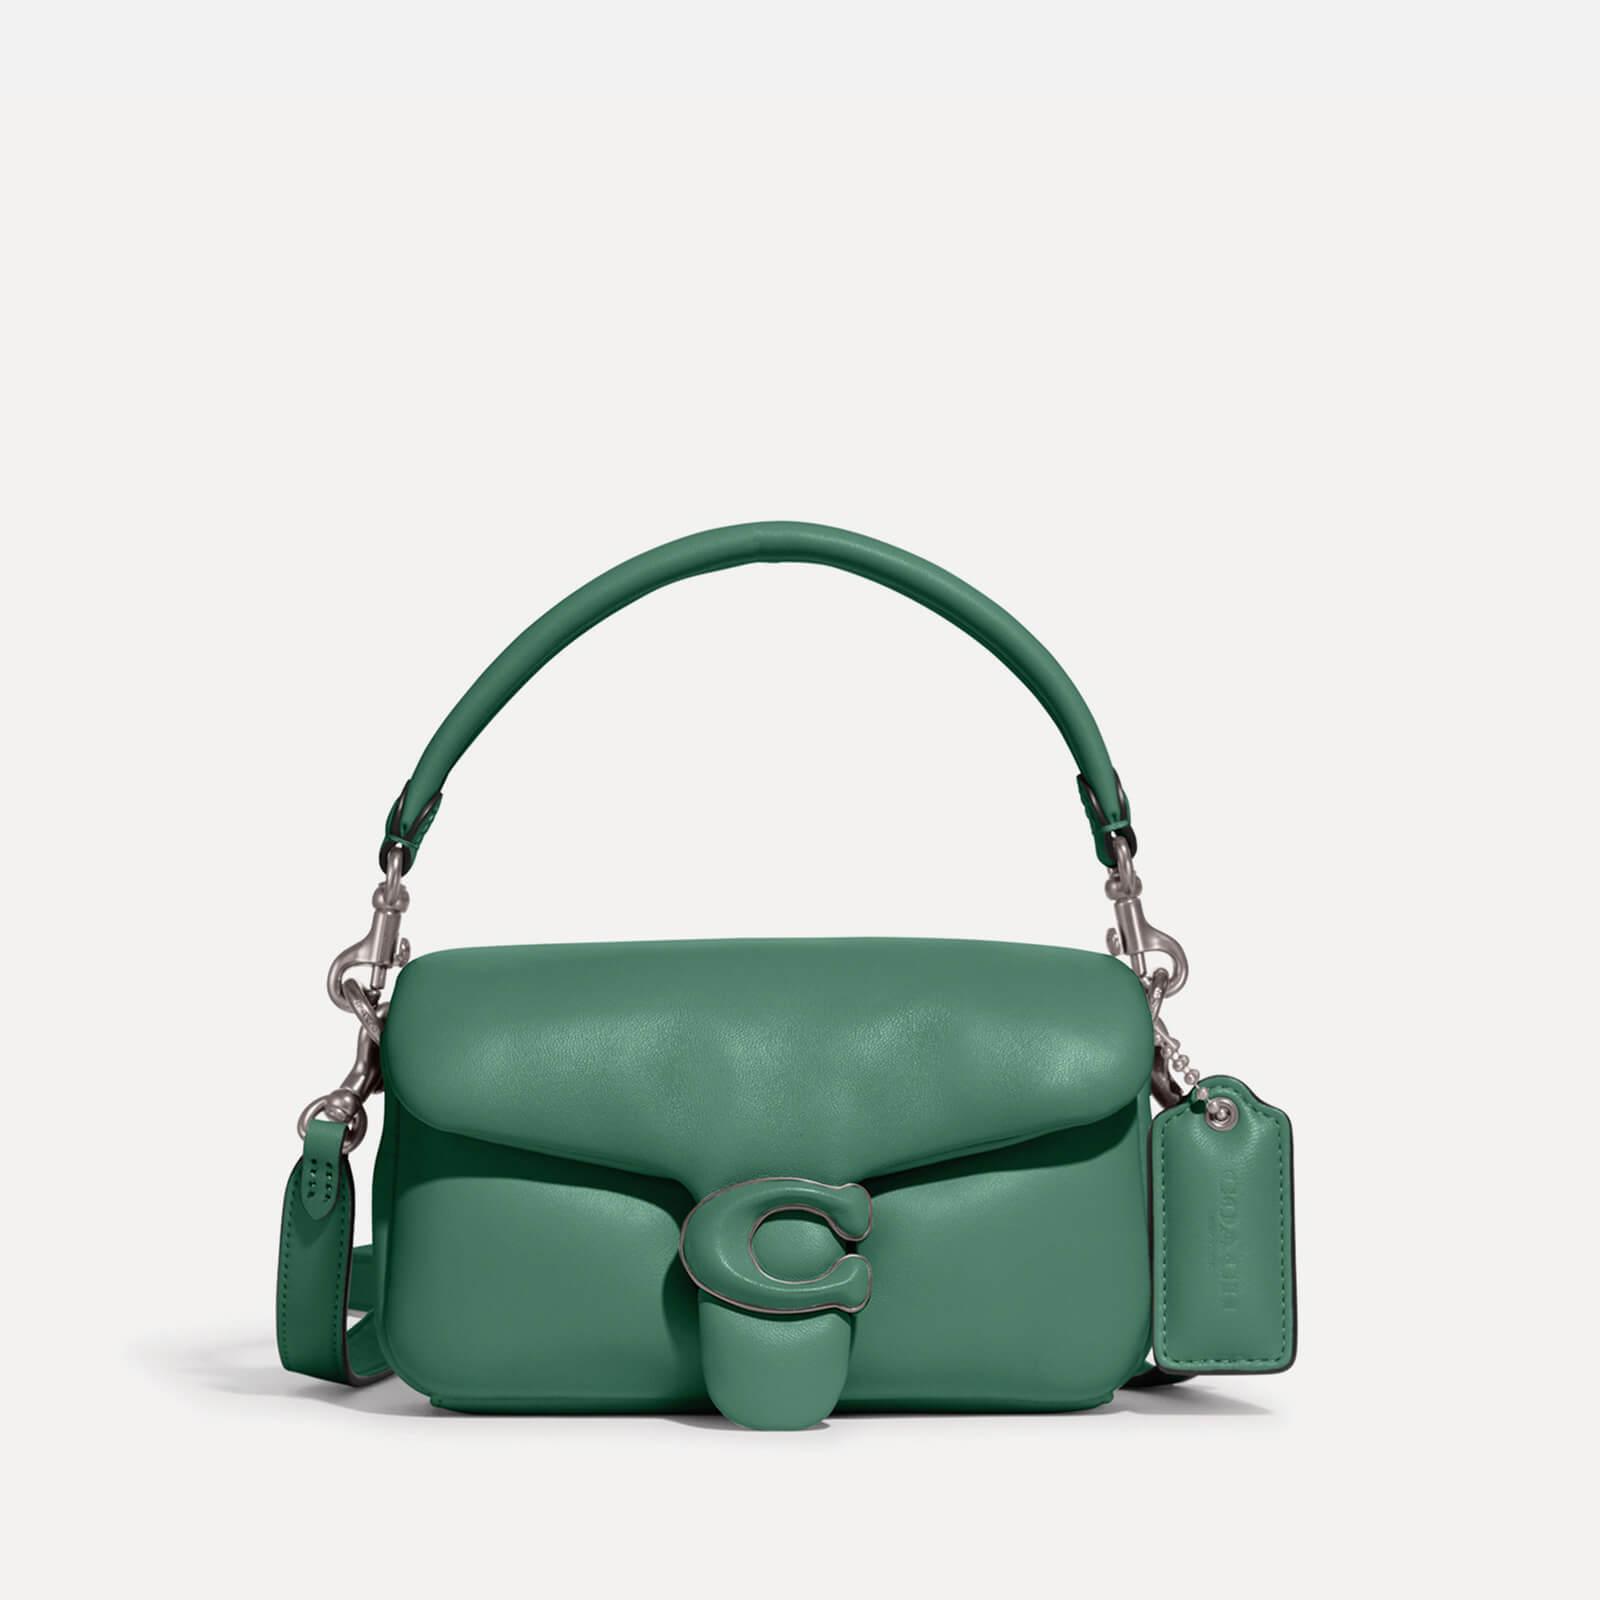 COACH Pillow Tabby 18 Leather Shoulder Bag in Green | Lyst Australia